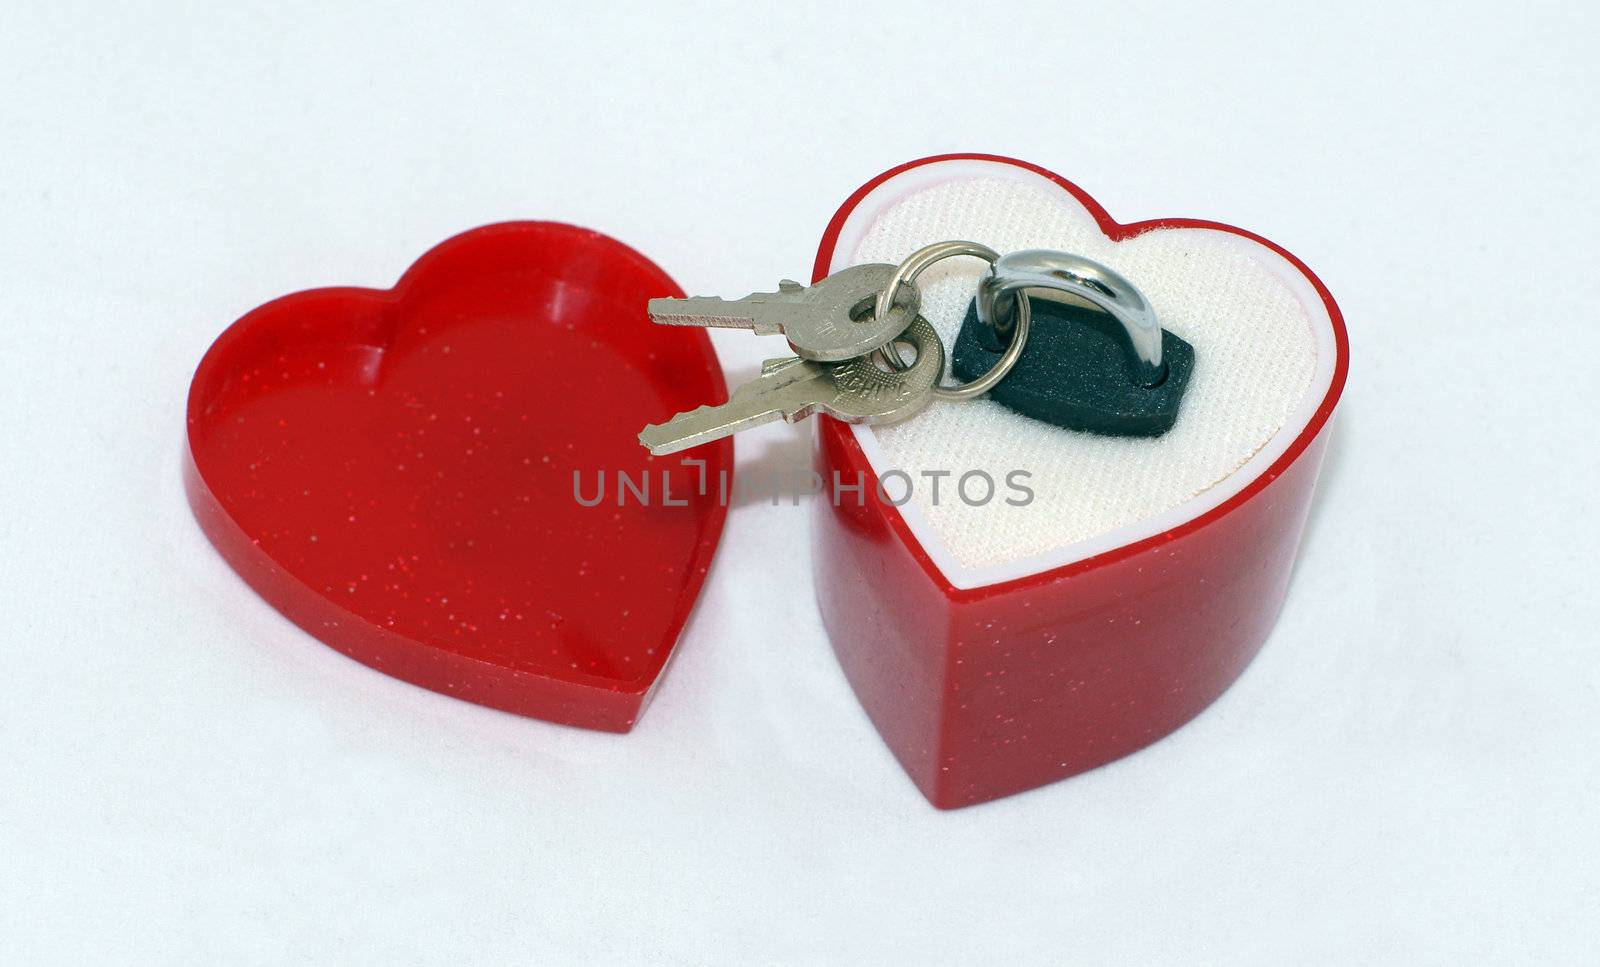 A marriage ring is replaced by a little pad lock and 2 keys in a heart shaped proposal box